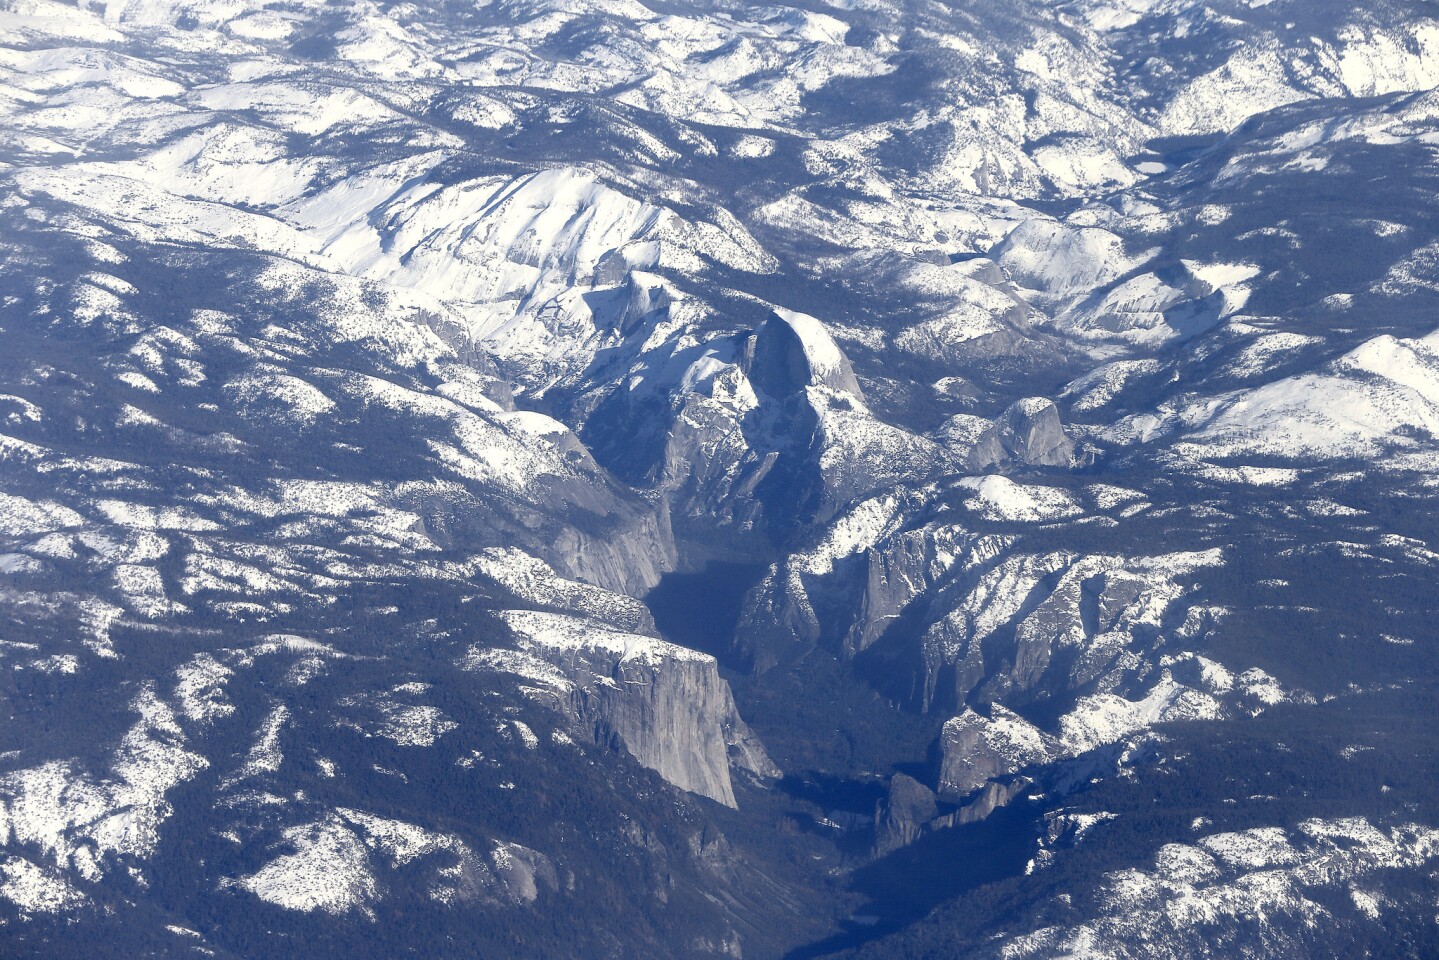 An aerial view shows the snowpack in the Sierra Nevada Mountains and Yosemite National Park